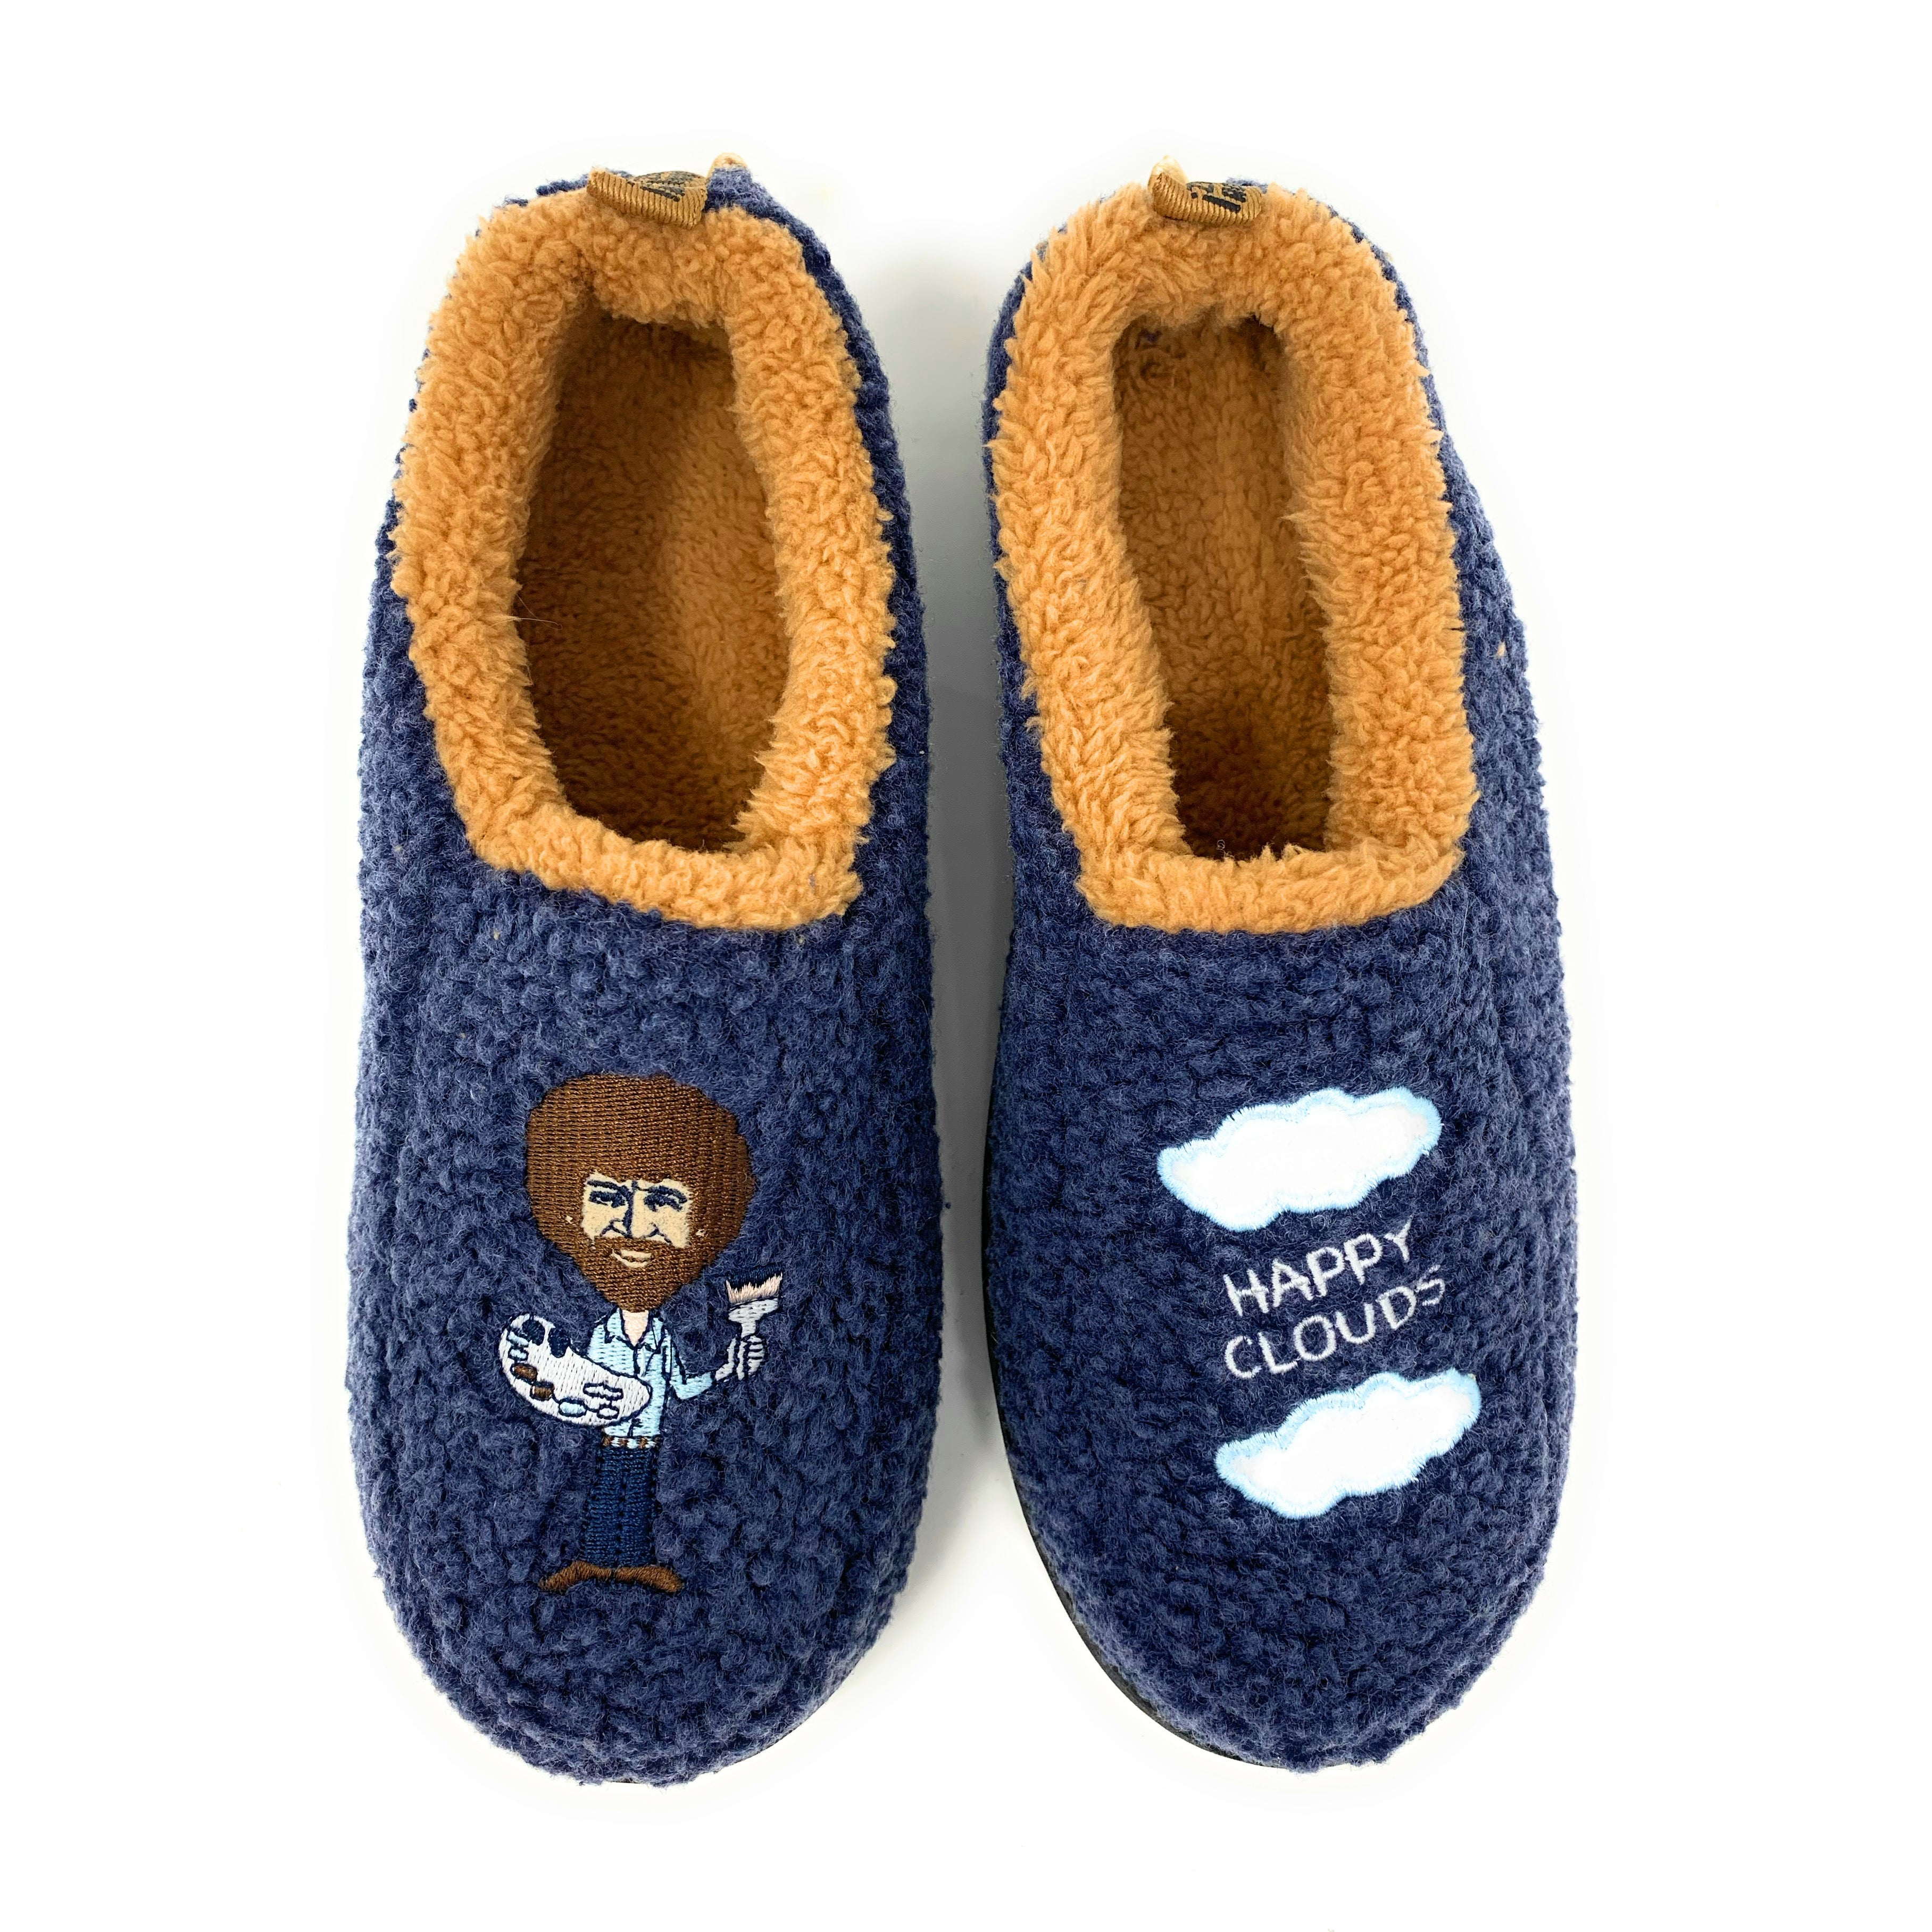 Let's Paint Sherpa Slippers for Men